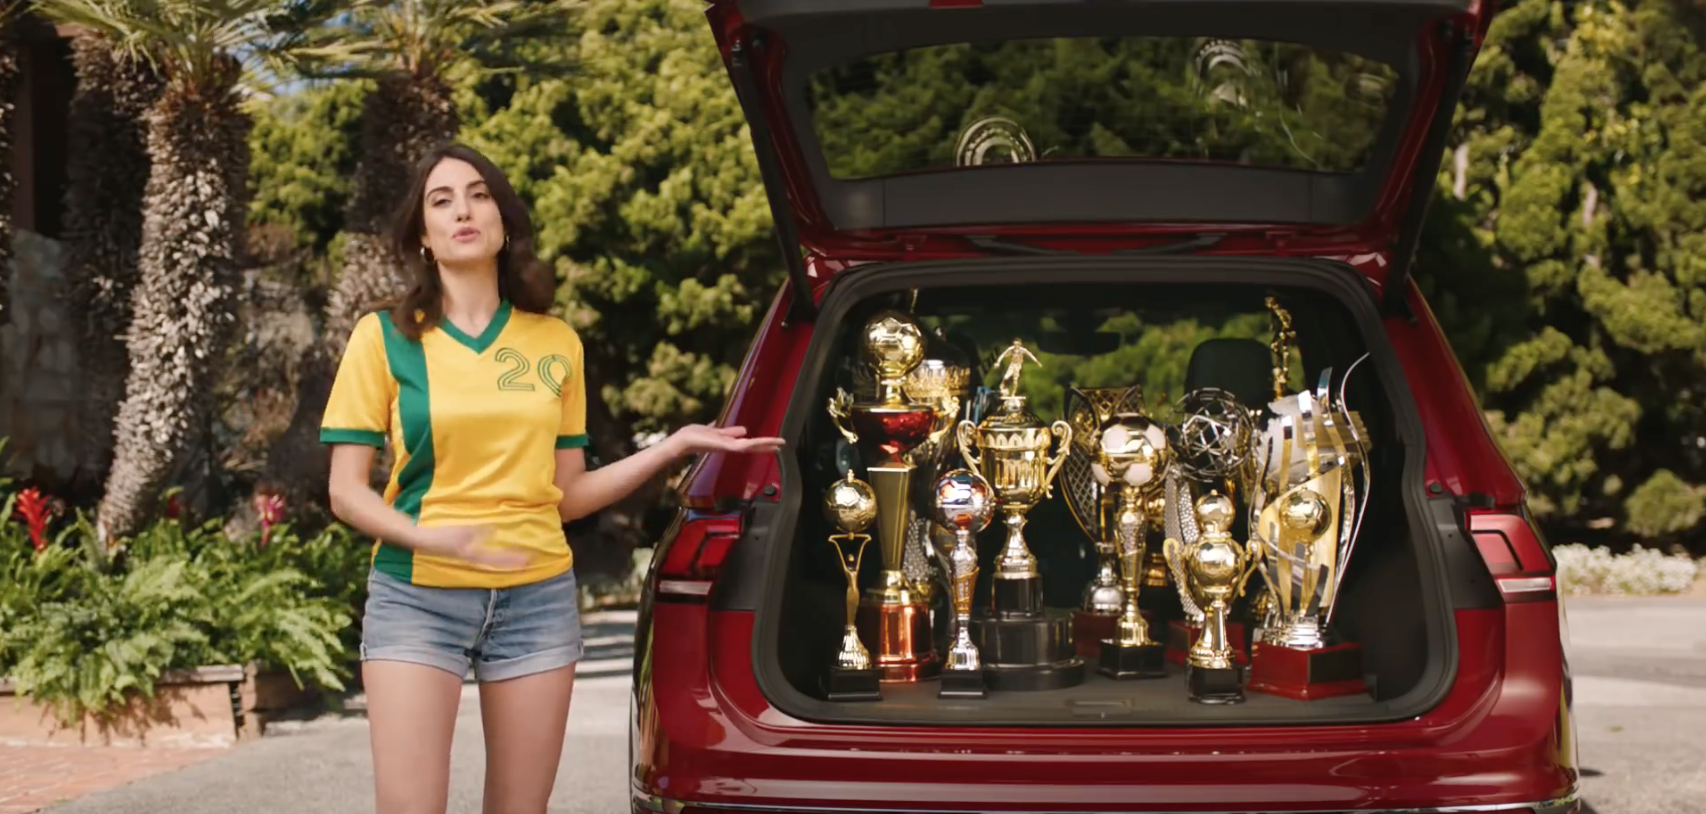 Who To Support Based On Volkswagen World Cup Commercial